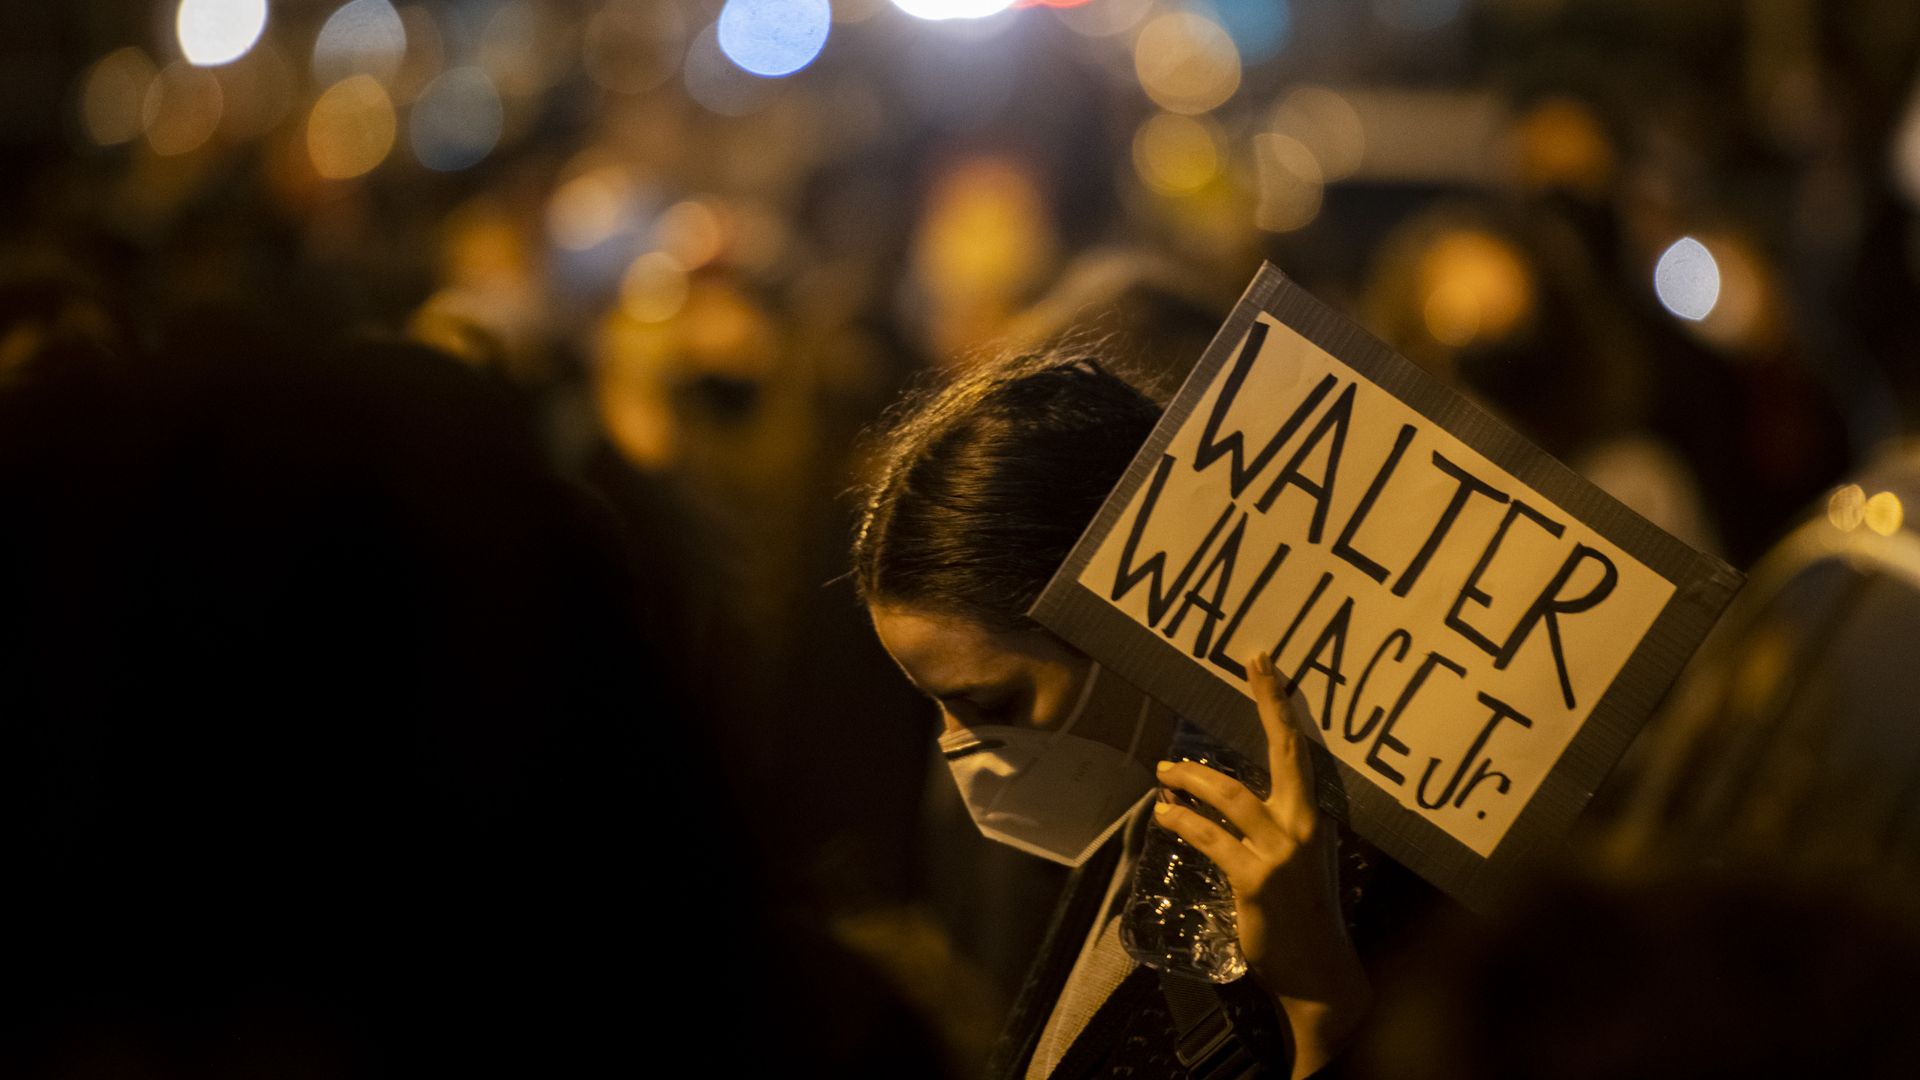 A protest near the location where Walter Wallace, Jr. was killed by two police officers on October 27, 2020 in Philadelphia, Pennsylvania. 